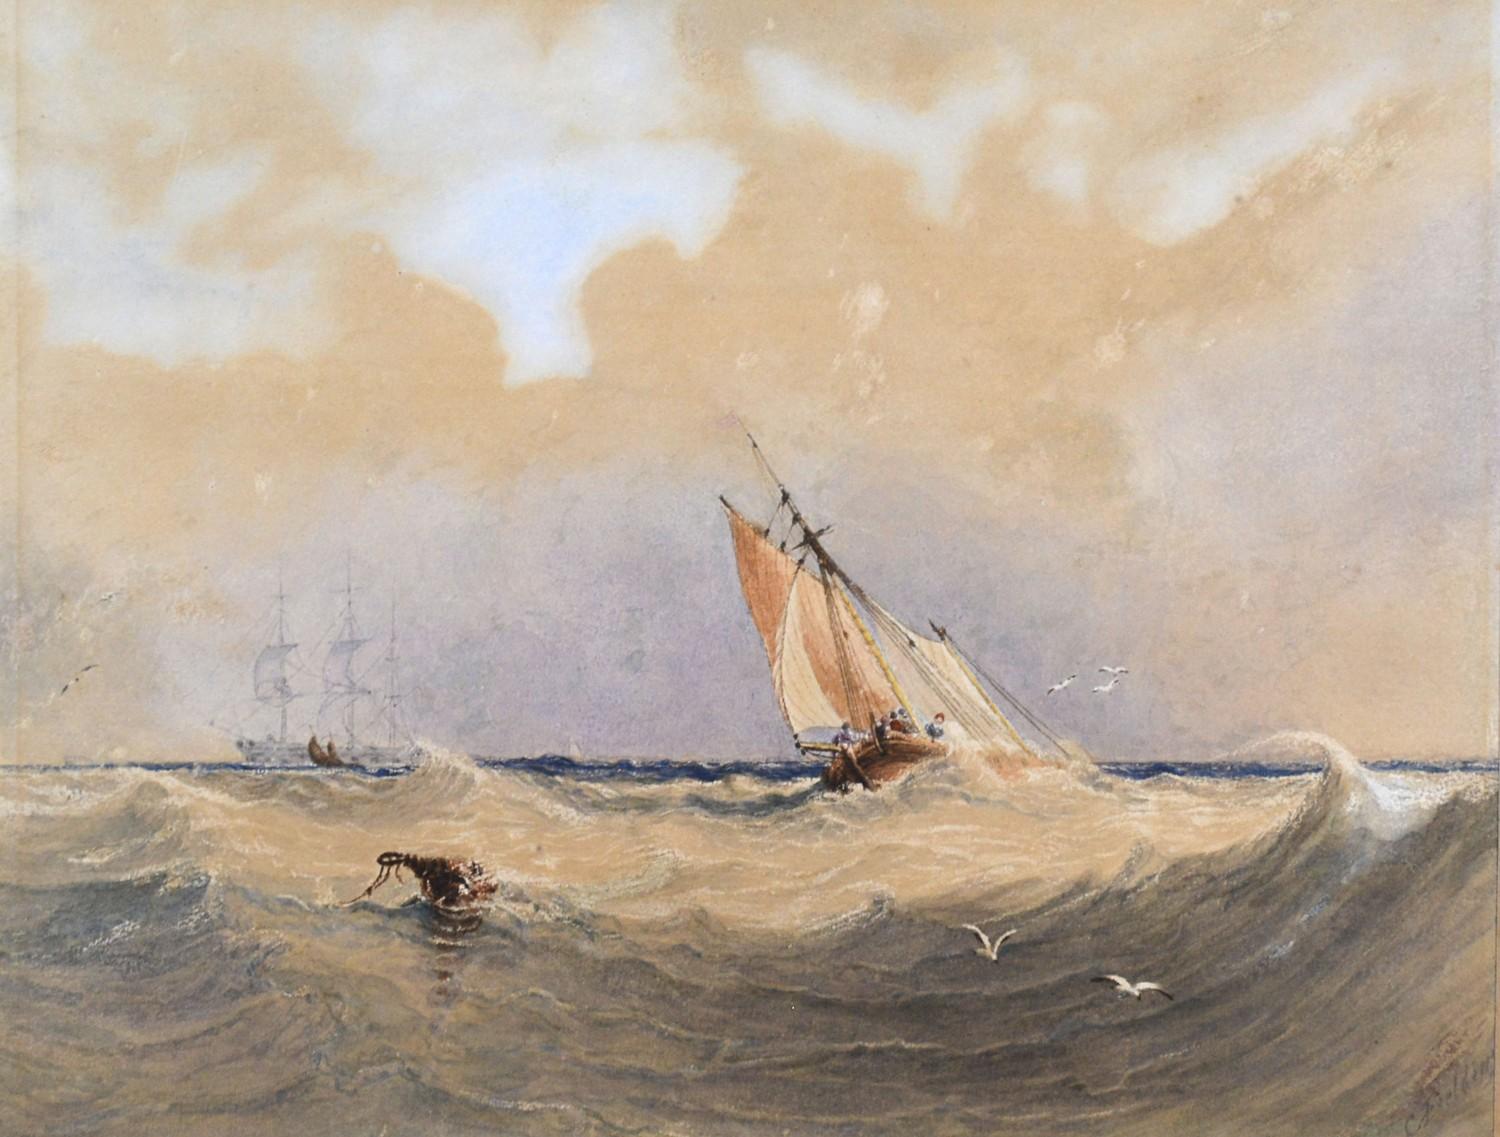 Anthony Vandye Copley-Fielding 'Shipping in a Rough Sea' watercolour, signed, 23 x 30 cms together - Image 2 of 3